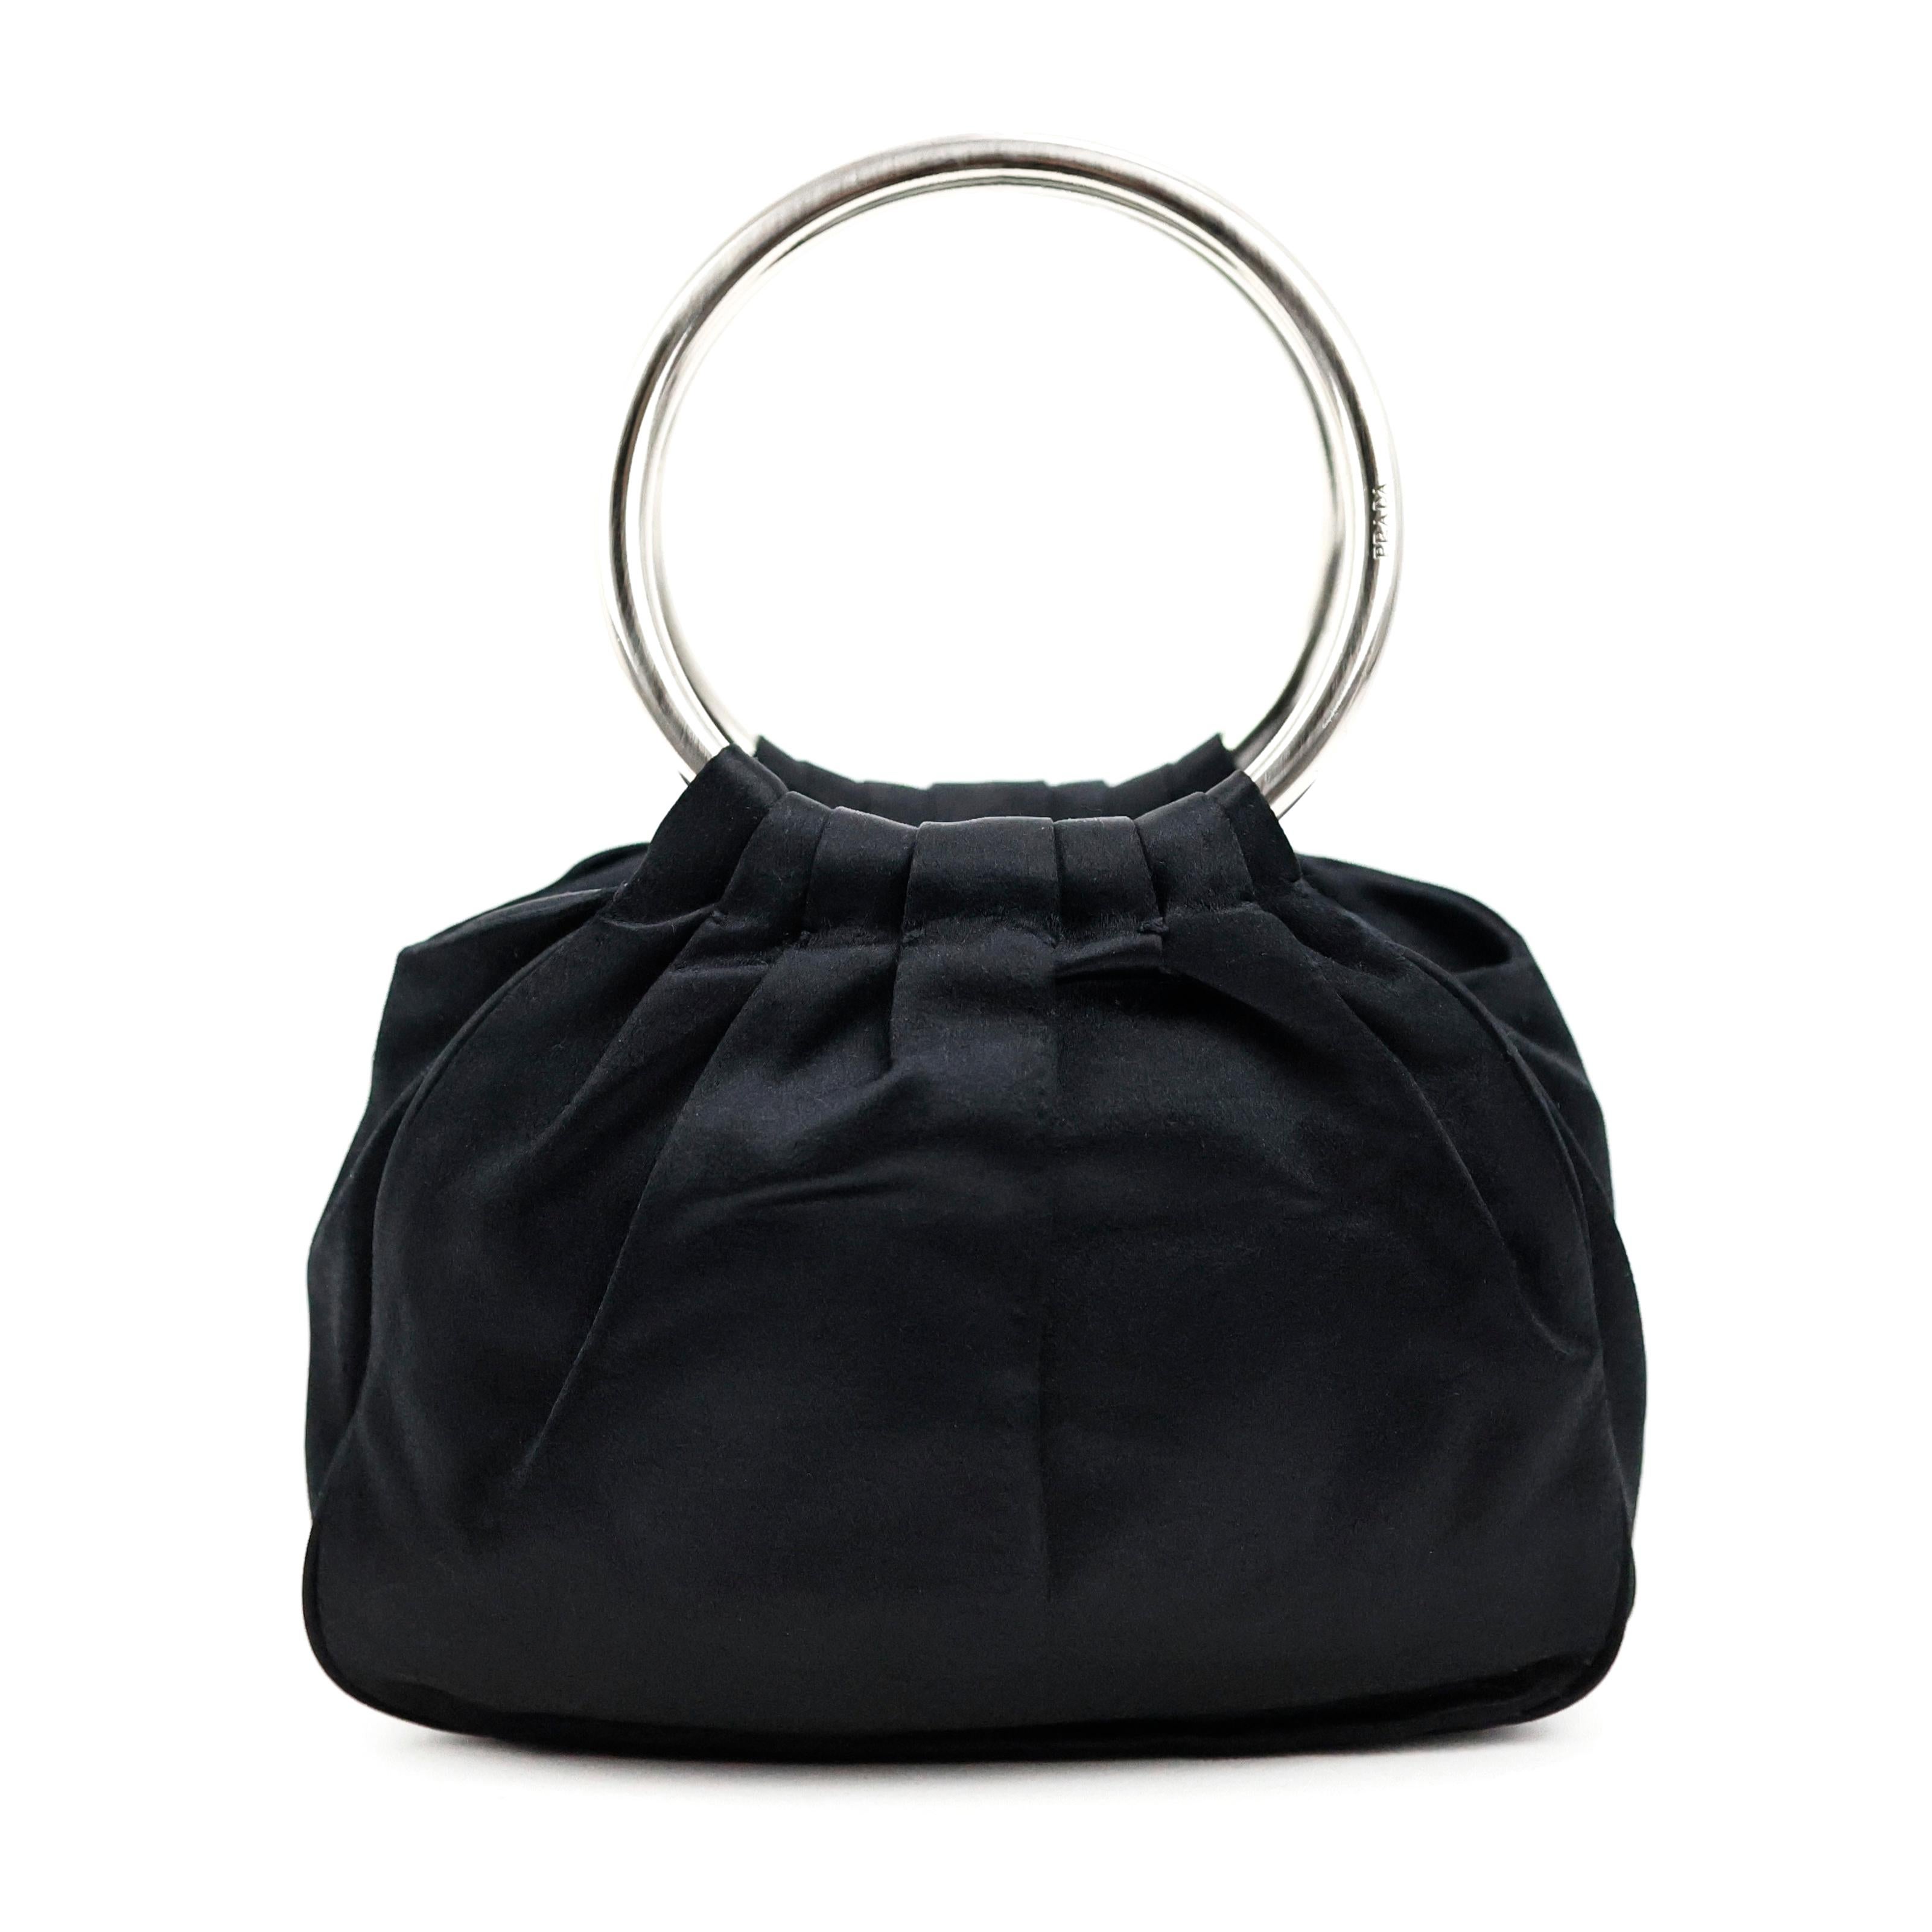 Prada ring handle bag in silk color black, silver hardware.

Condition:
Really good. To note: some pulled threads on silk.

Packing/accessories:
Dustbag, mirror.

Measurements:
18cm x 13cm x 8cm